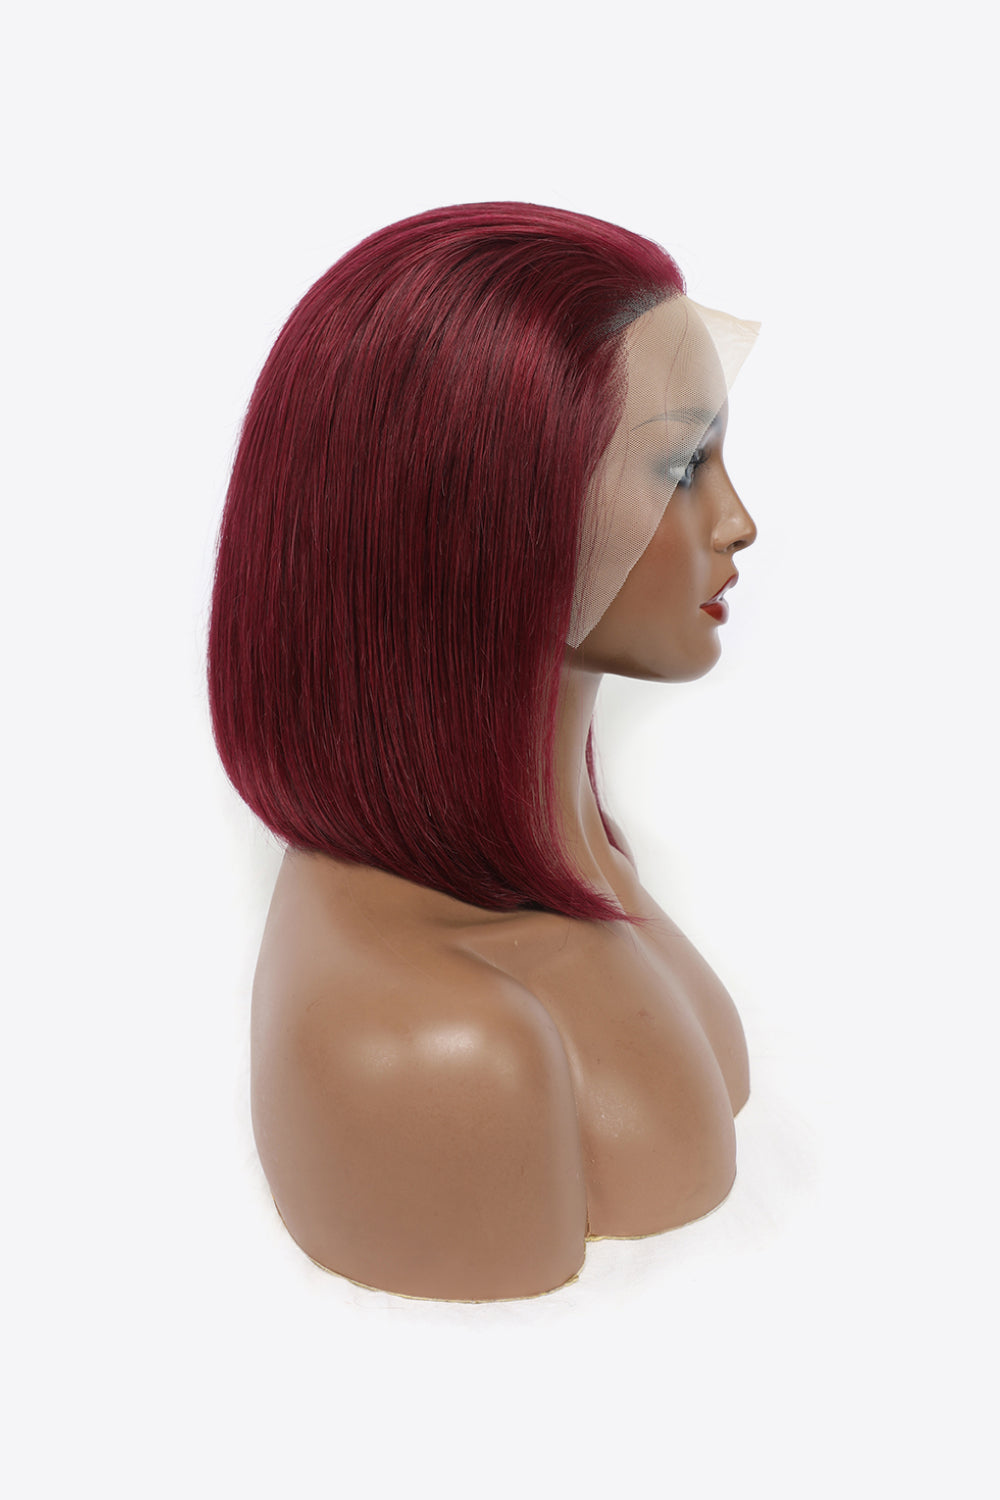 12" 155g #99J Lace Front Wigs Human Hair 150% Density - AllIn Computer